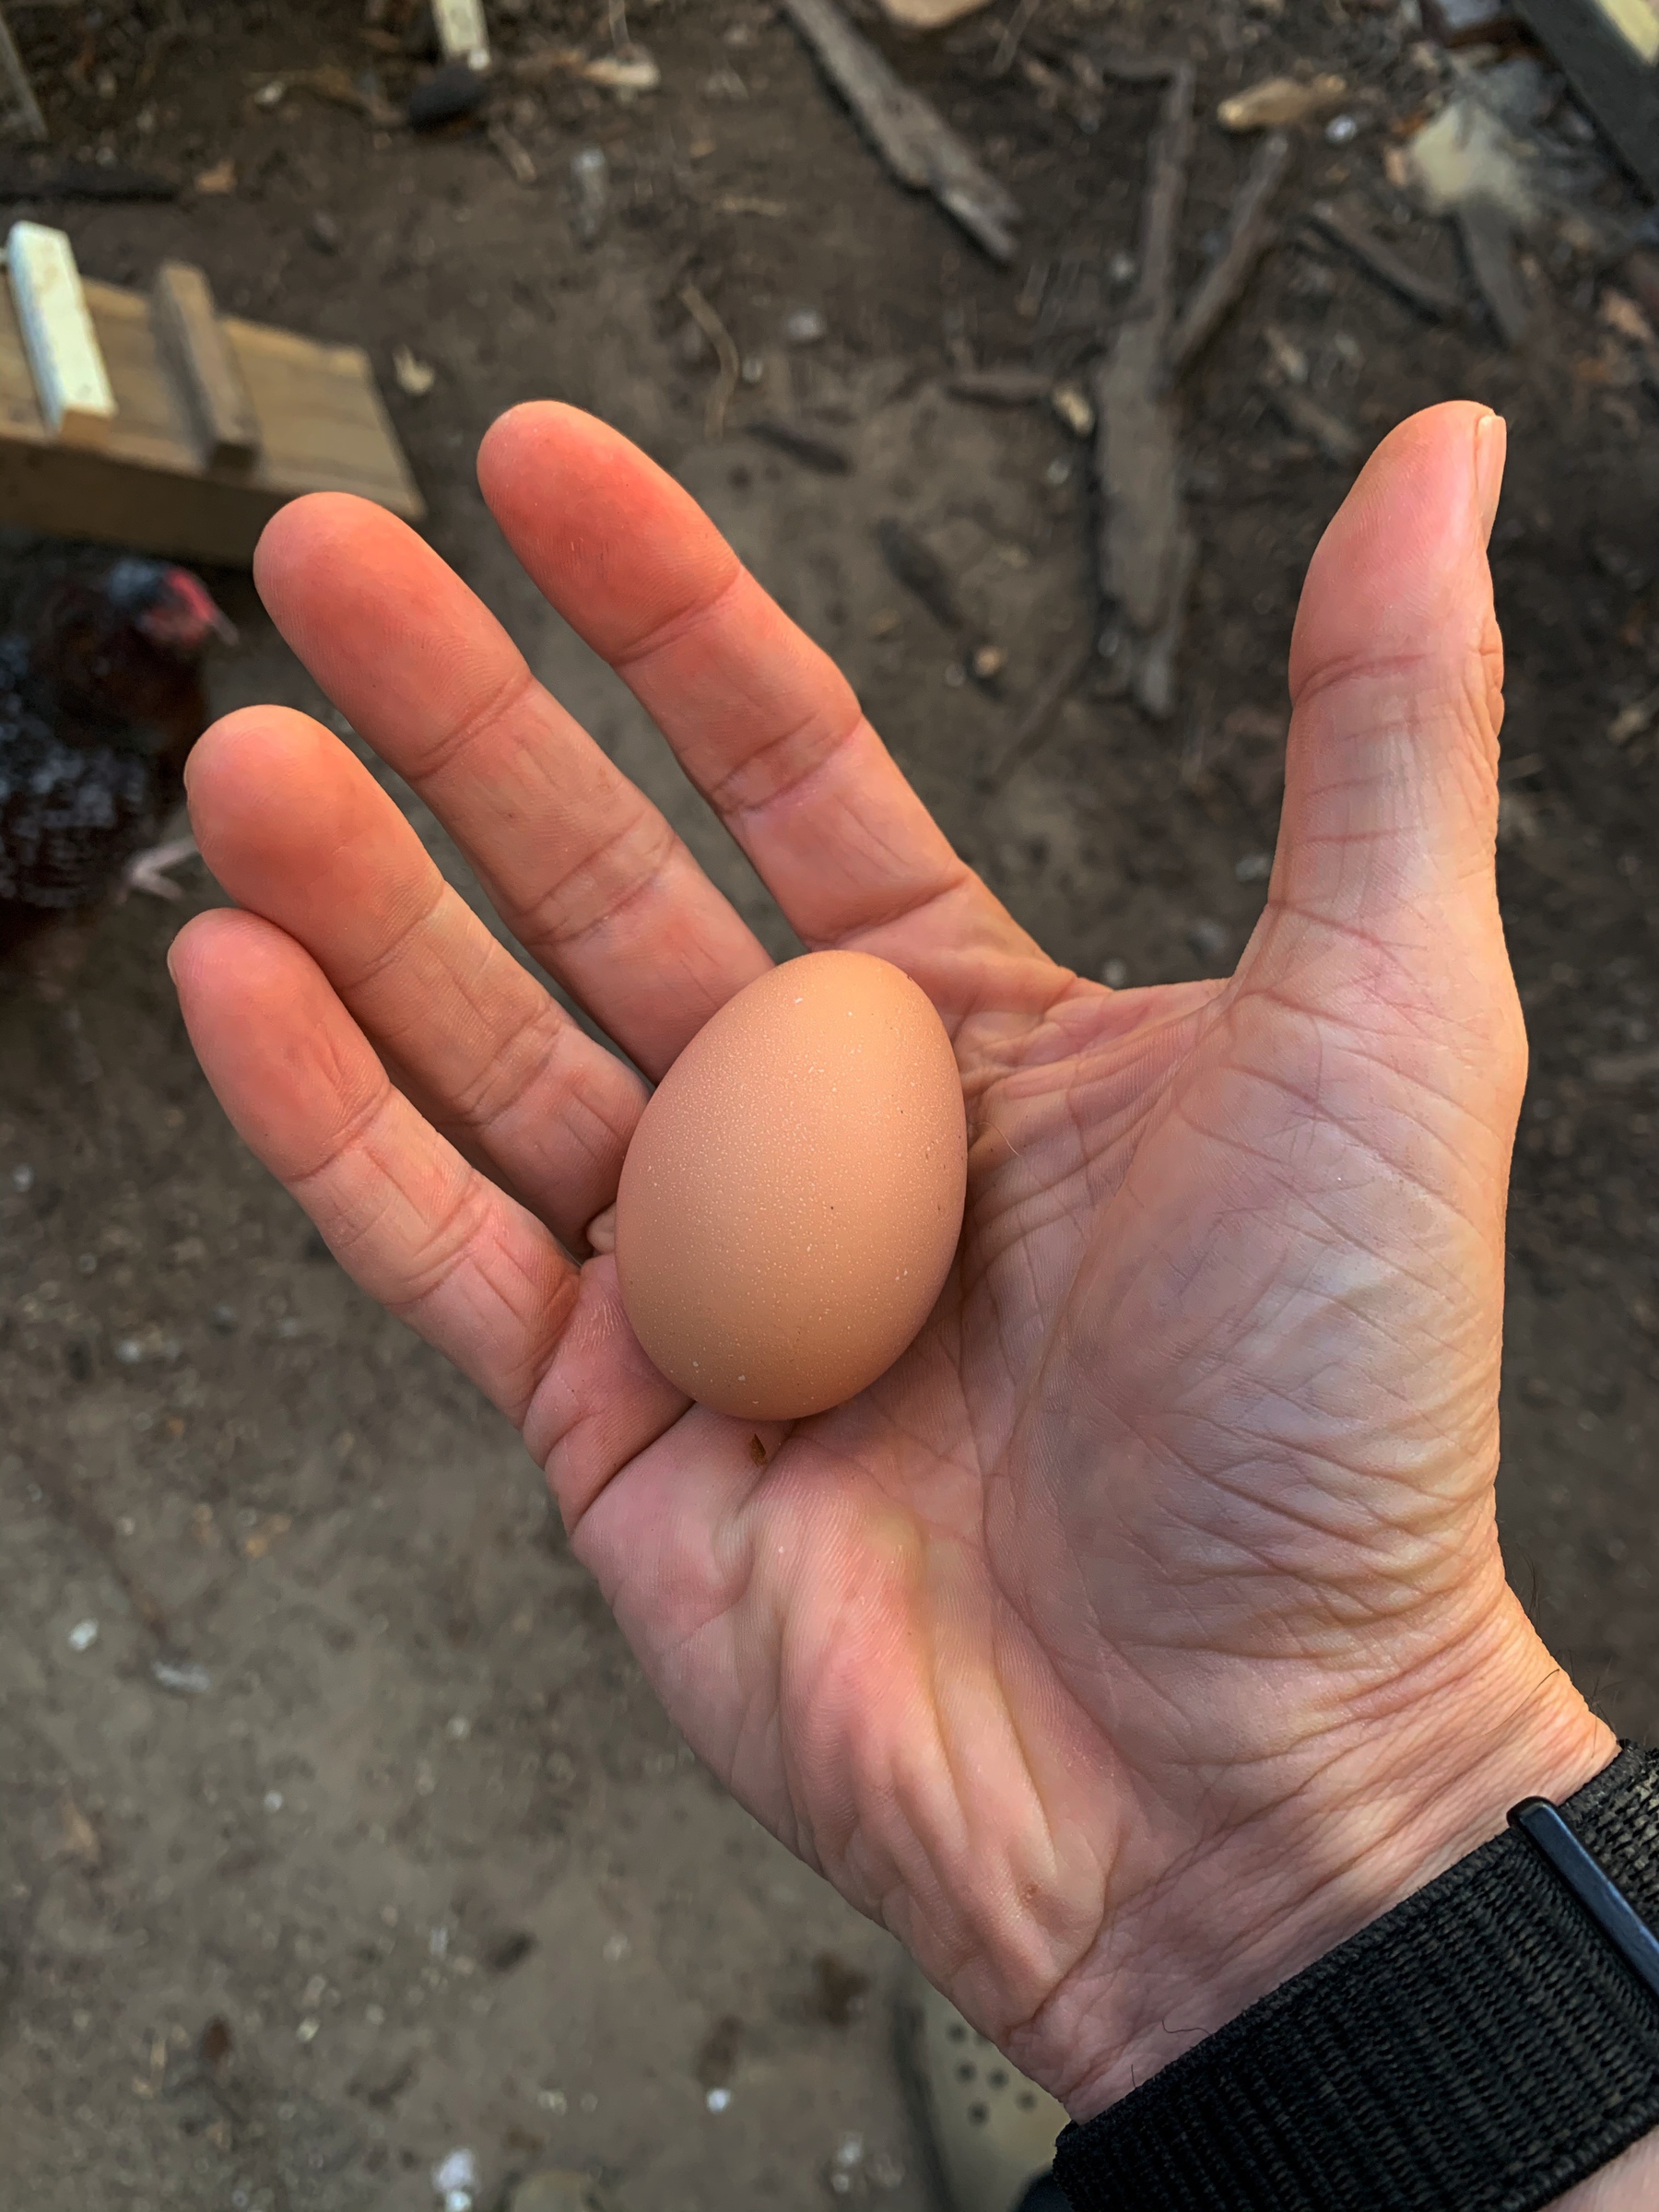 First egg in hand. 